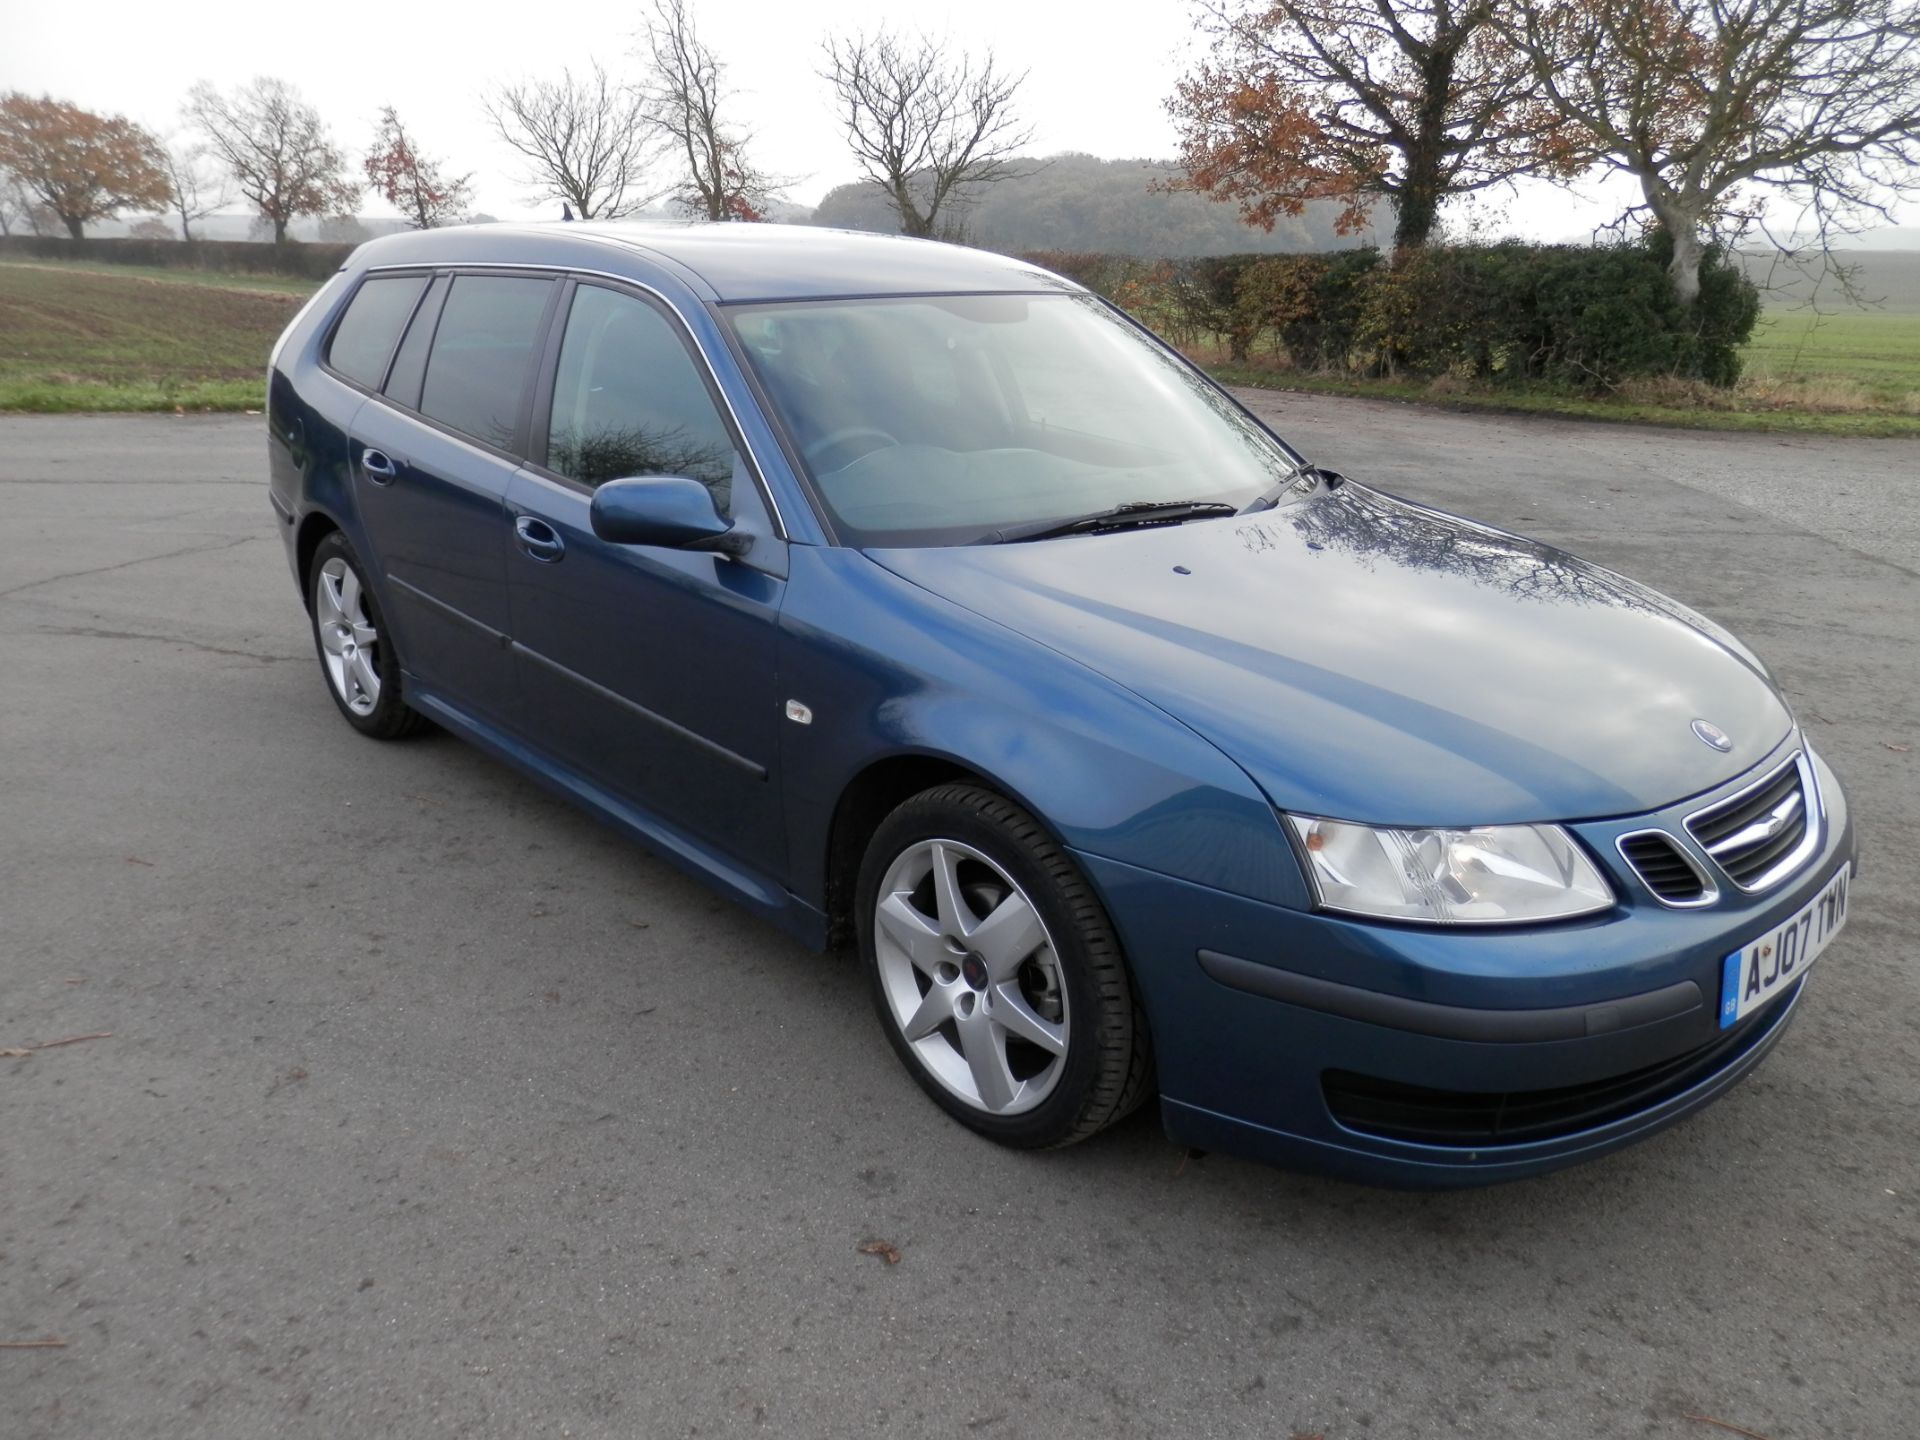 NOW WITH NO RESERVE !! 2007/07 SAAB 93 SPORTWAGON 1.9 TID 120 BHP, 6 SPEED MANUAL, MOT MARCH 2007.